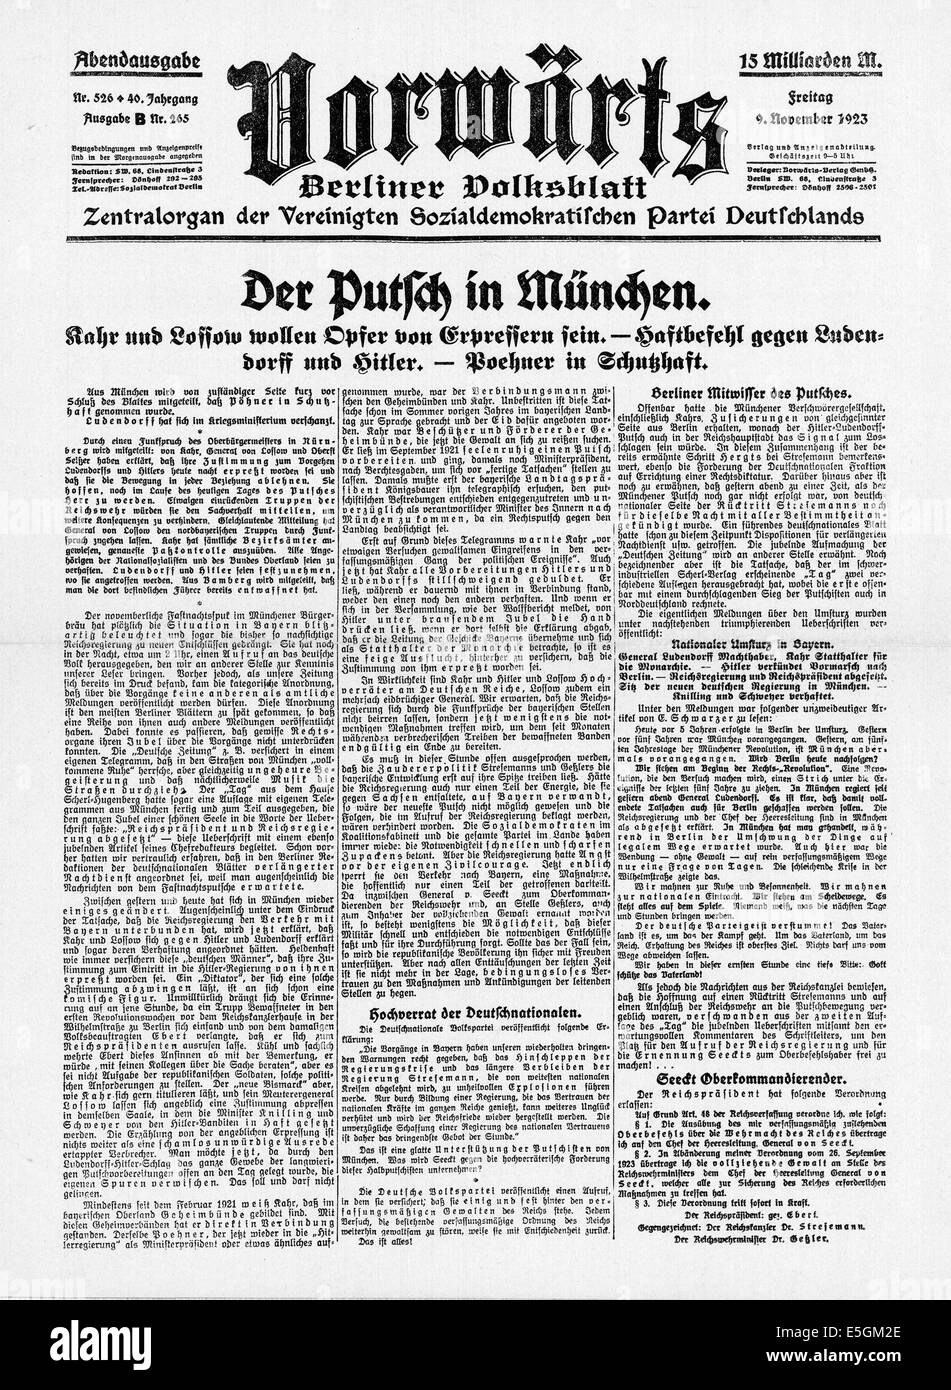 1923 Vorwarts (Germany) front page reporting the Munich Putsch by Adolf Hitler's National Socialist against the government of Bavaria Stock Photo